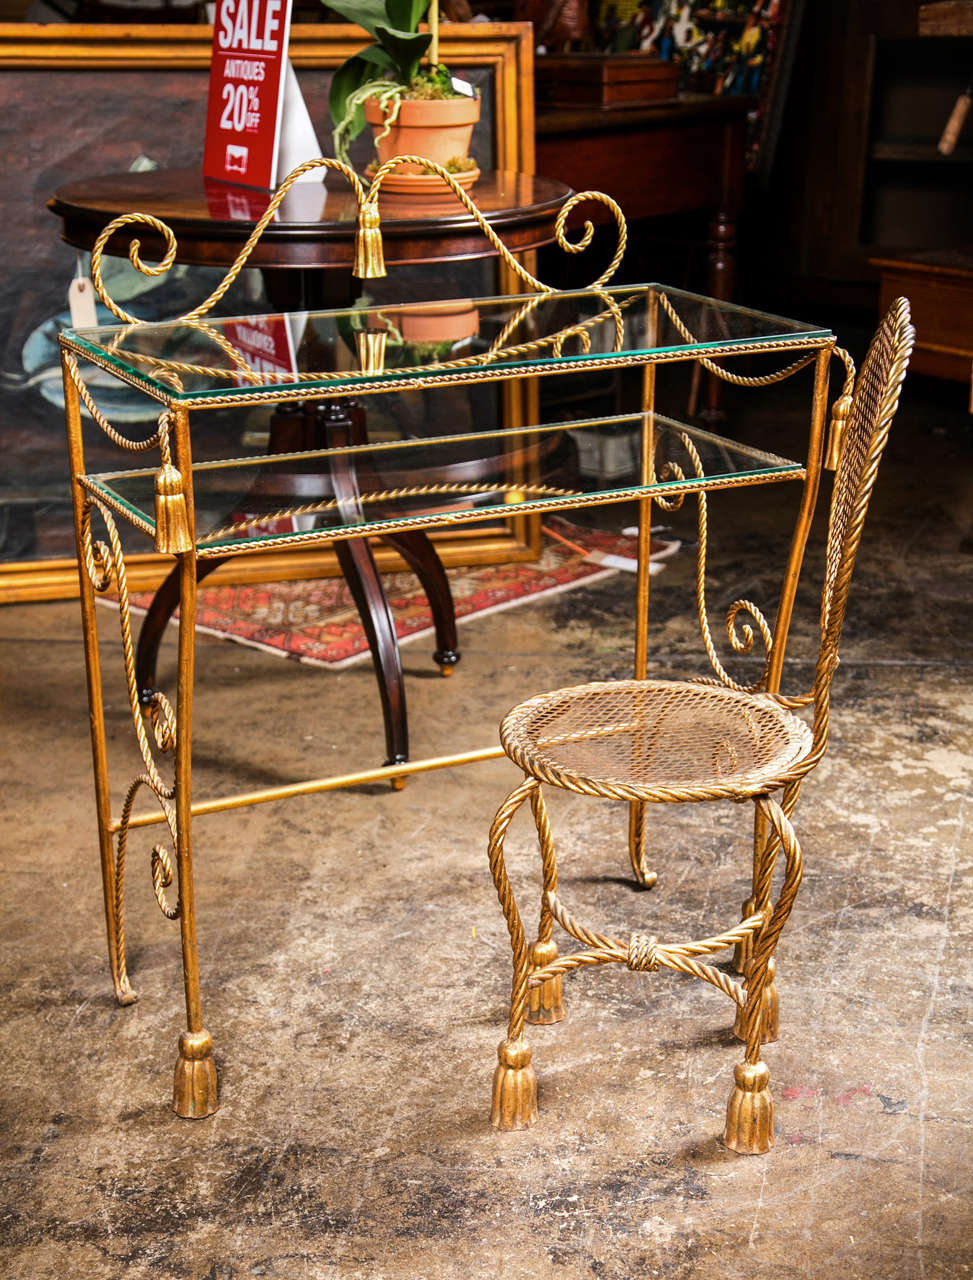 Mid-century gilded iron vanity table and chair, c. 1940-60, of rope twist form with tassel feet and decoration and a heart shaped chair back. The chair dimensions are 13 x 13 x 31 with a  15